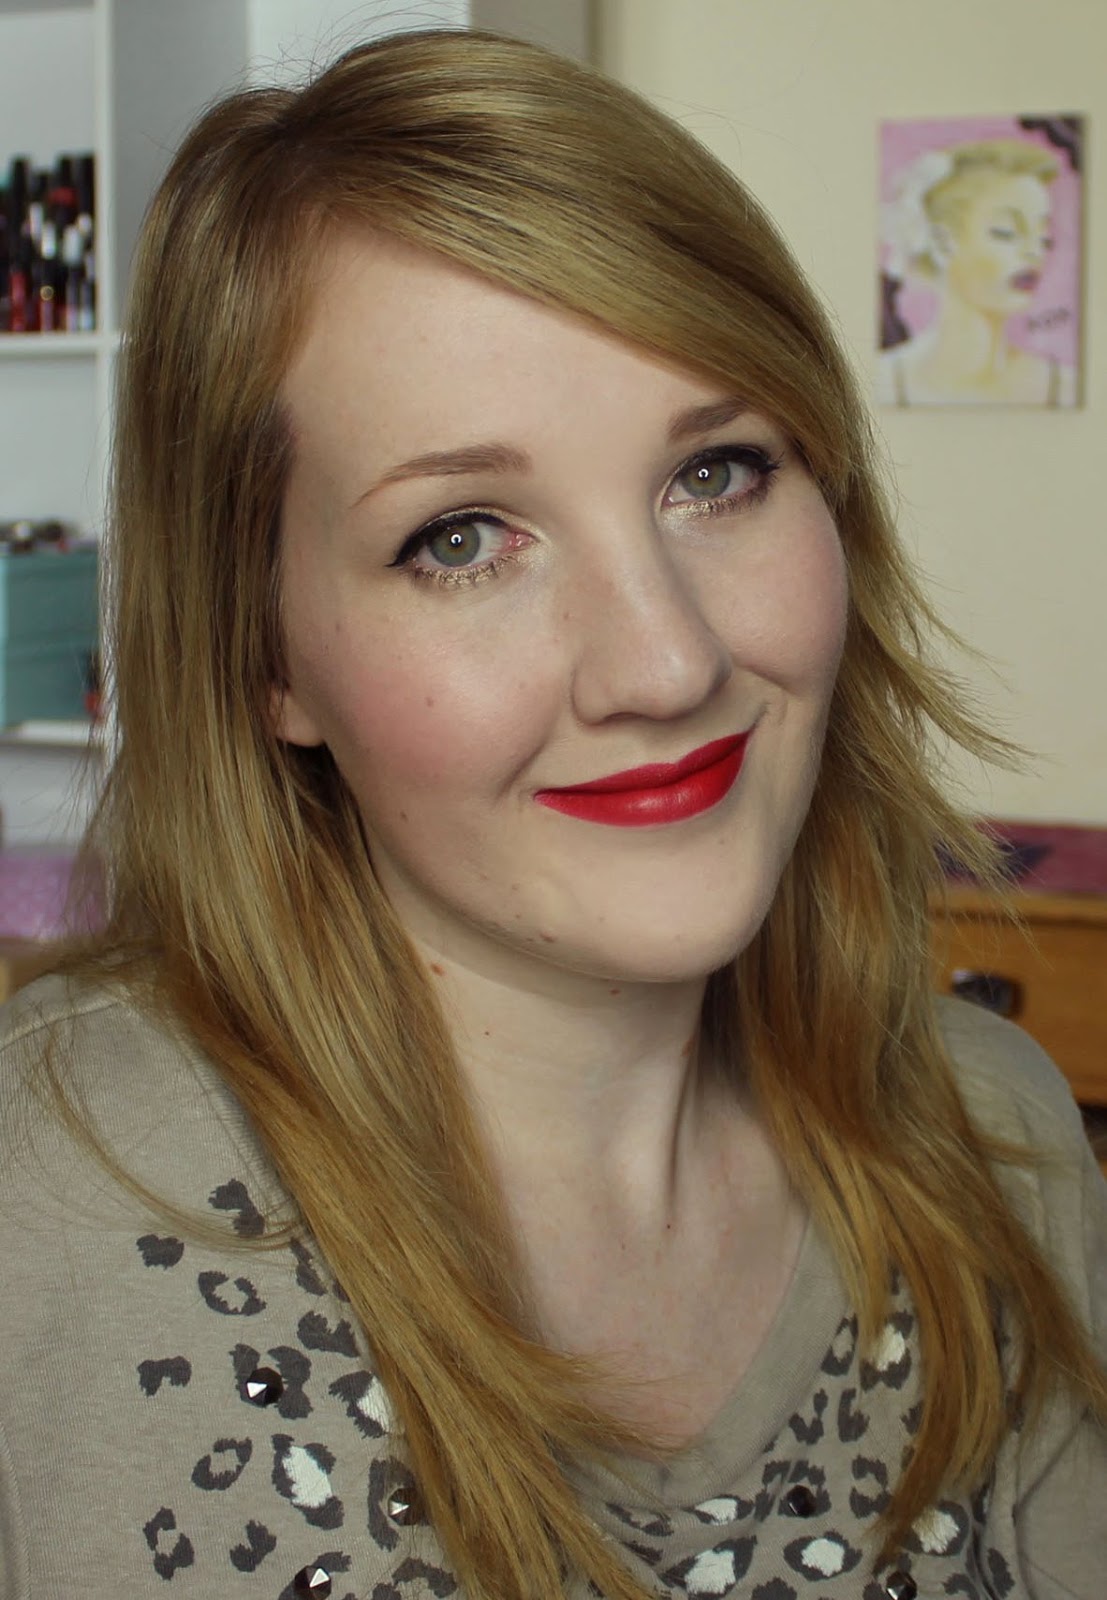 MAC Heirloom Mix Lipstick - Sparks of Romance Swatches & Review